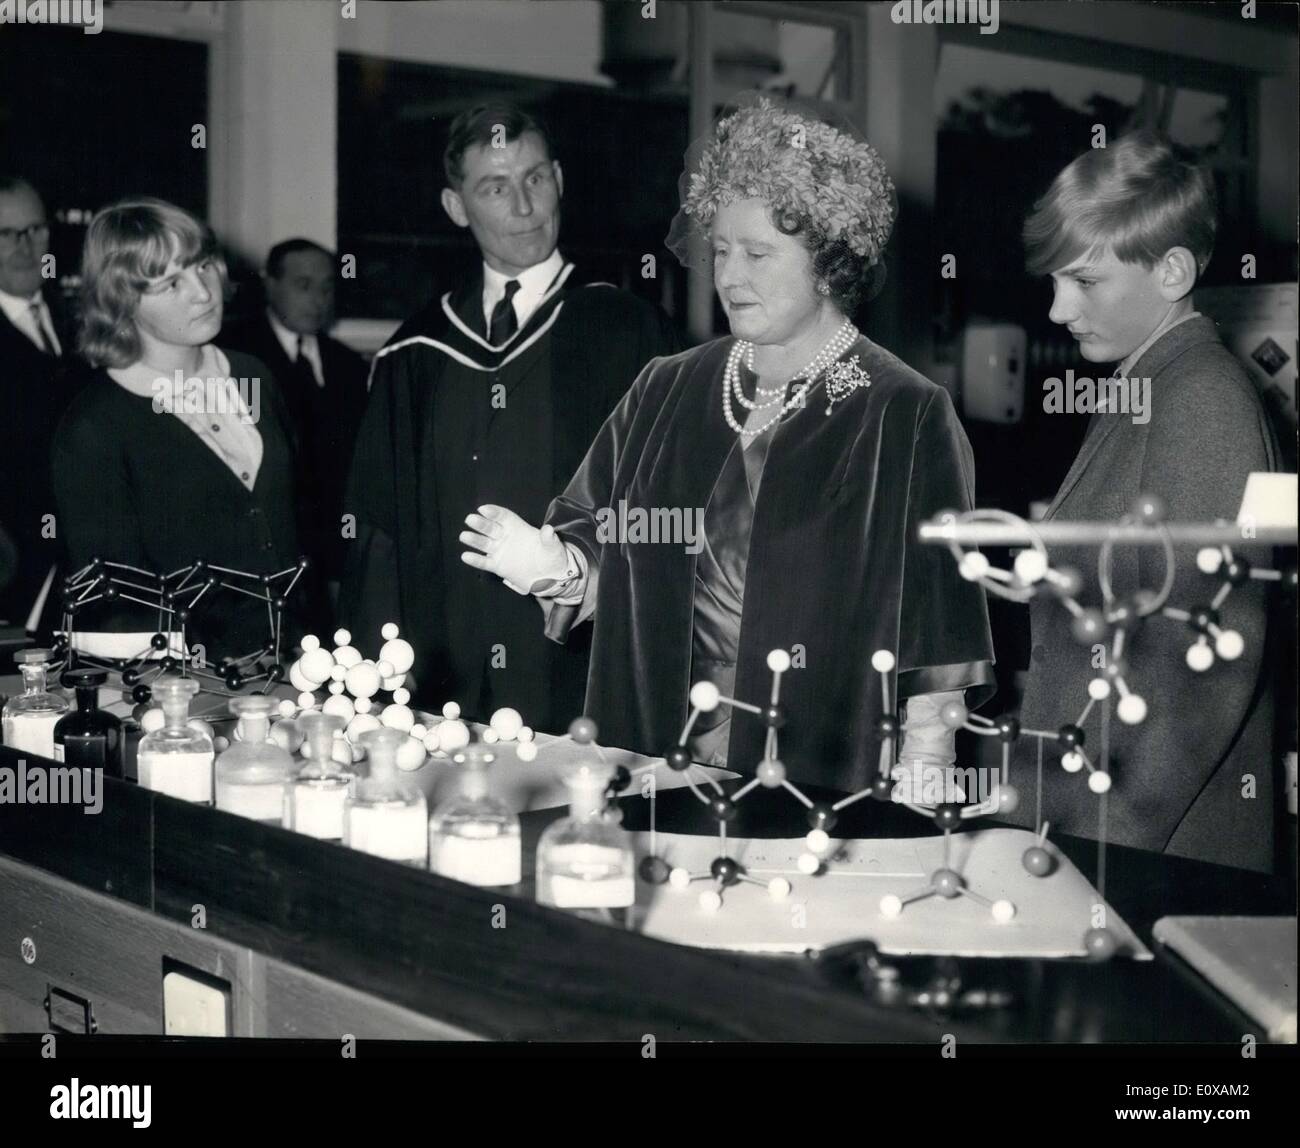 Nov. 11, 1965 - Queen Elizabeth The Queen Mother Visits King Edward School Witley: HM. Queen Elizabeth the Queen Mother, today visited the King Edward's School Witley, and opened a new science block. Picture shows Queen Elizabeth the Queen Mother is watched by pupils as she tours the science lab, after opening the new block. Stock Photo